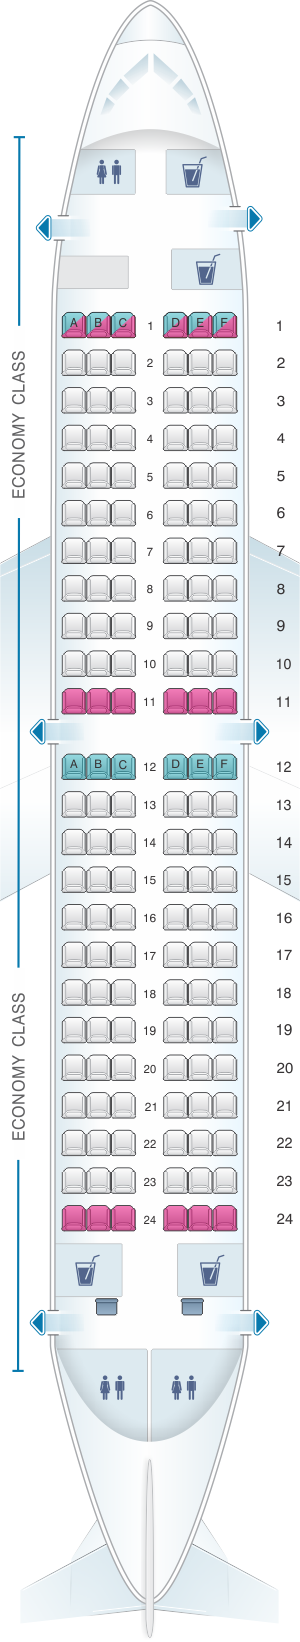 Seat map for Air Serbia Boeing B737 300